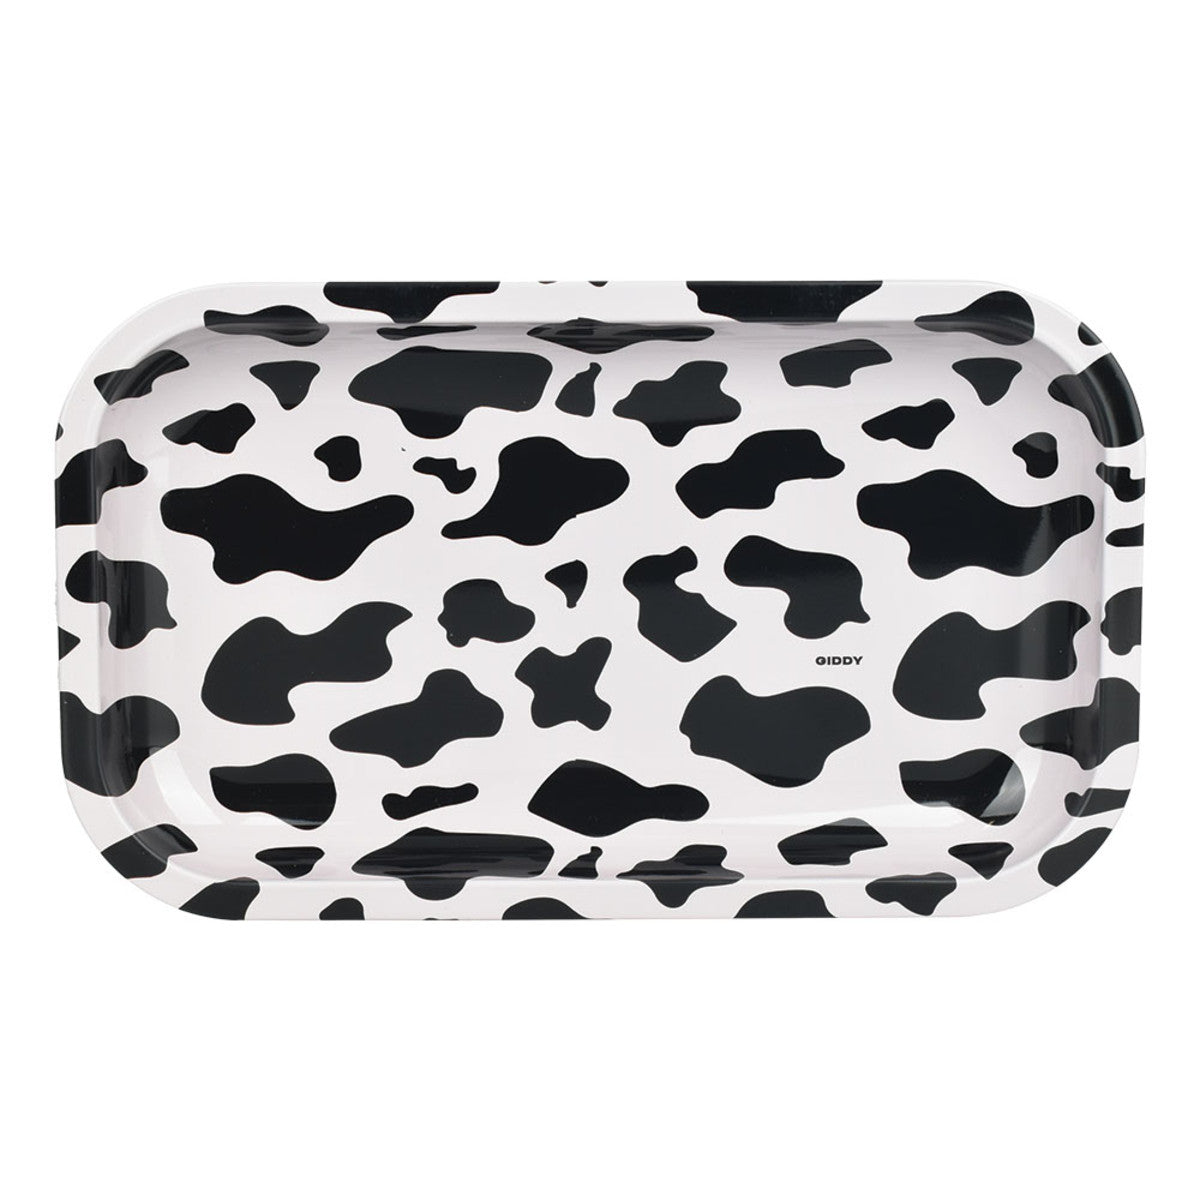 Giddy Cow Print Rolling Tray